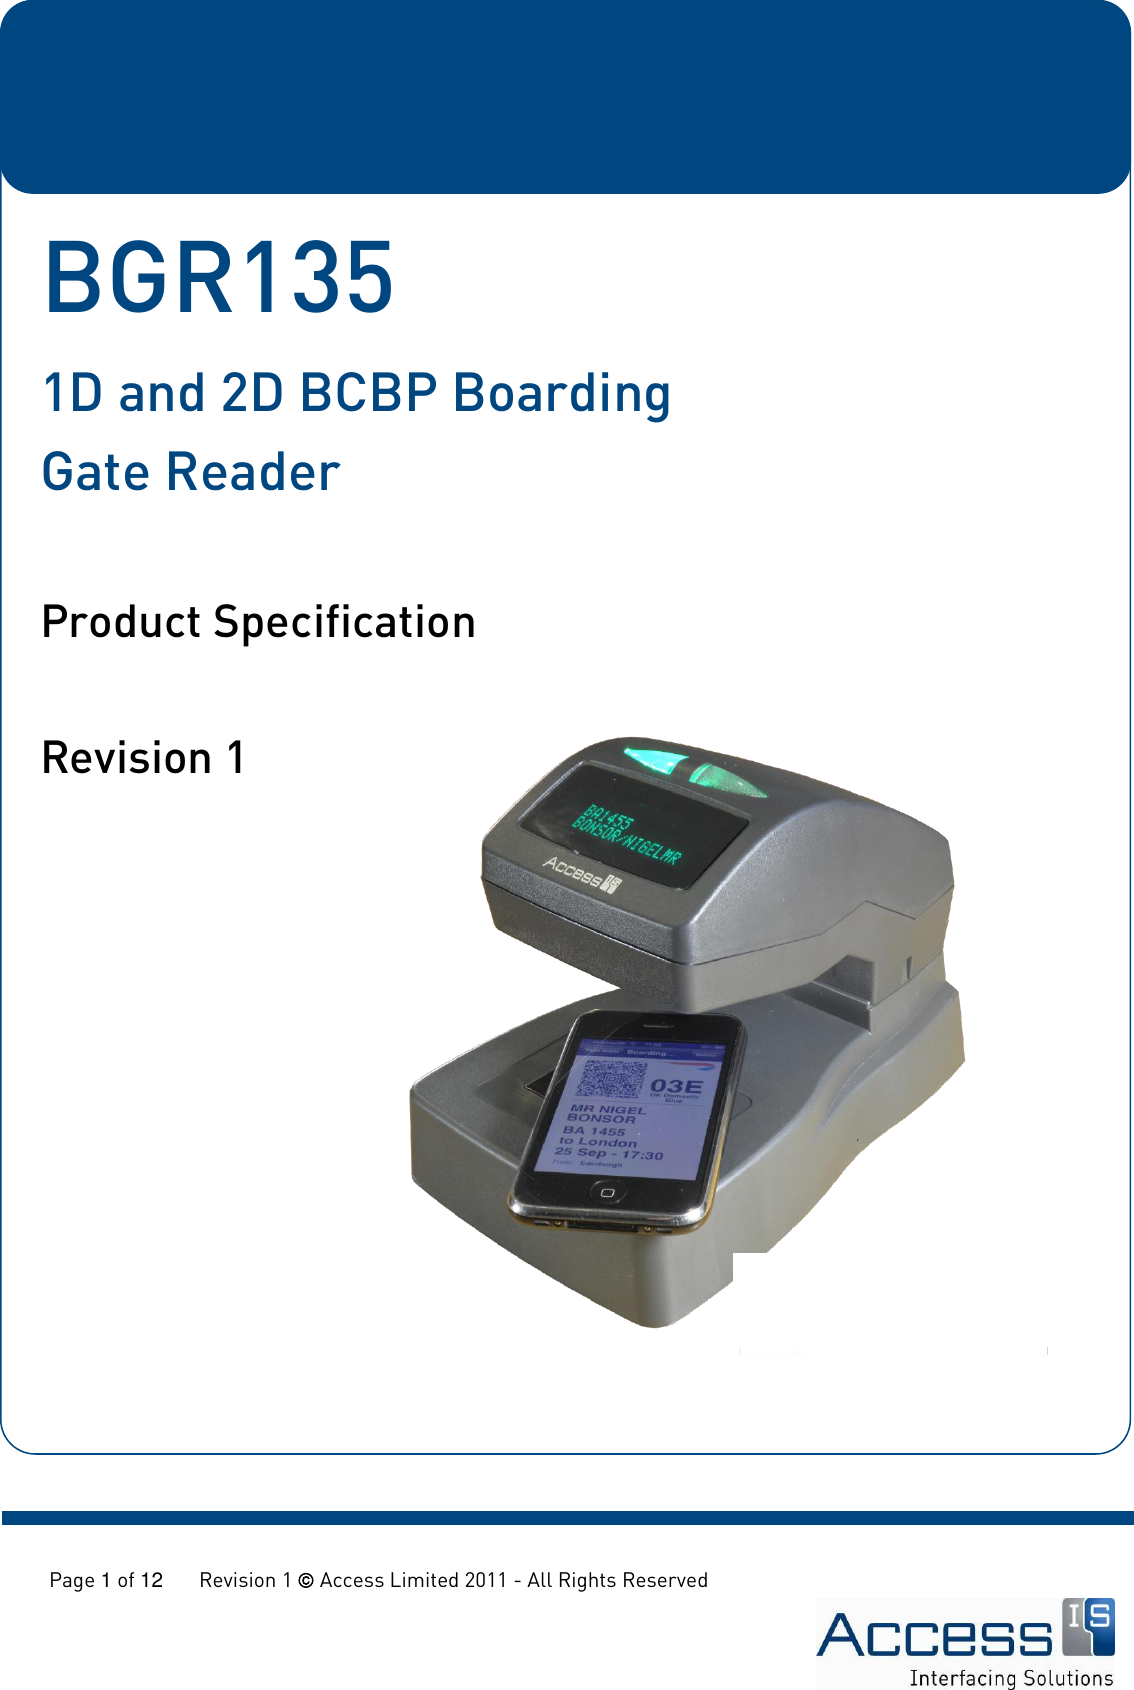   Page 1 of 12       Revision 1  Access Limited 2011 - All Rights Reserved             BGR135 1D and 2D BCBP Boarding Gate Reader    Product Specification  Revision 1  